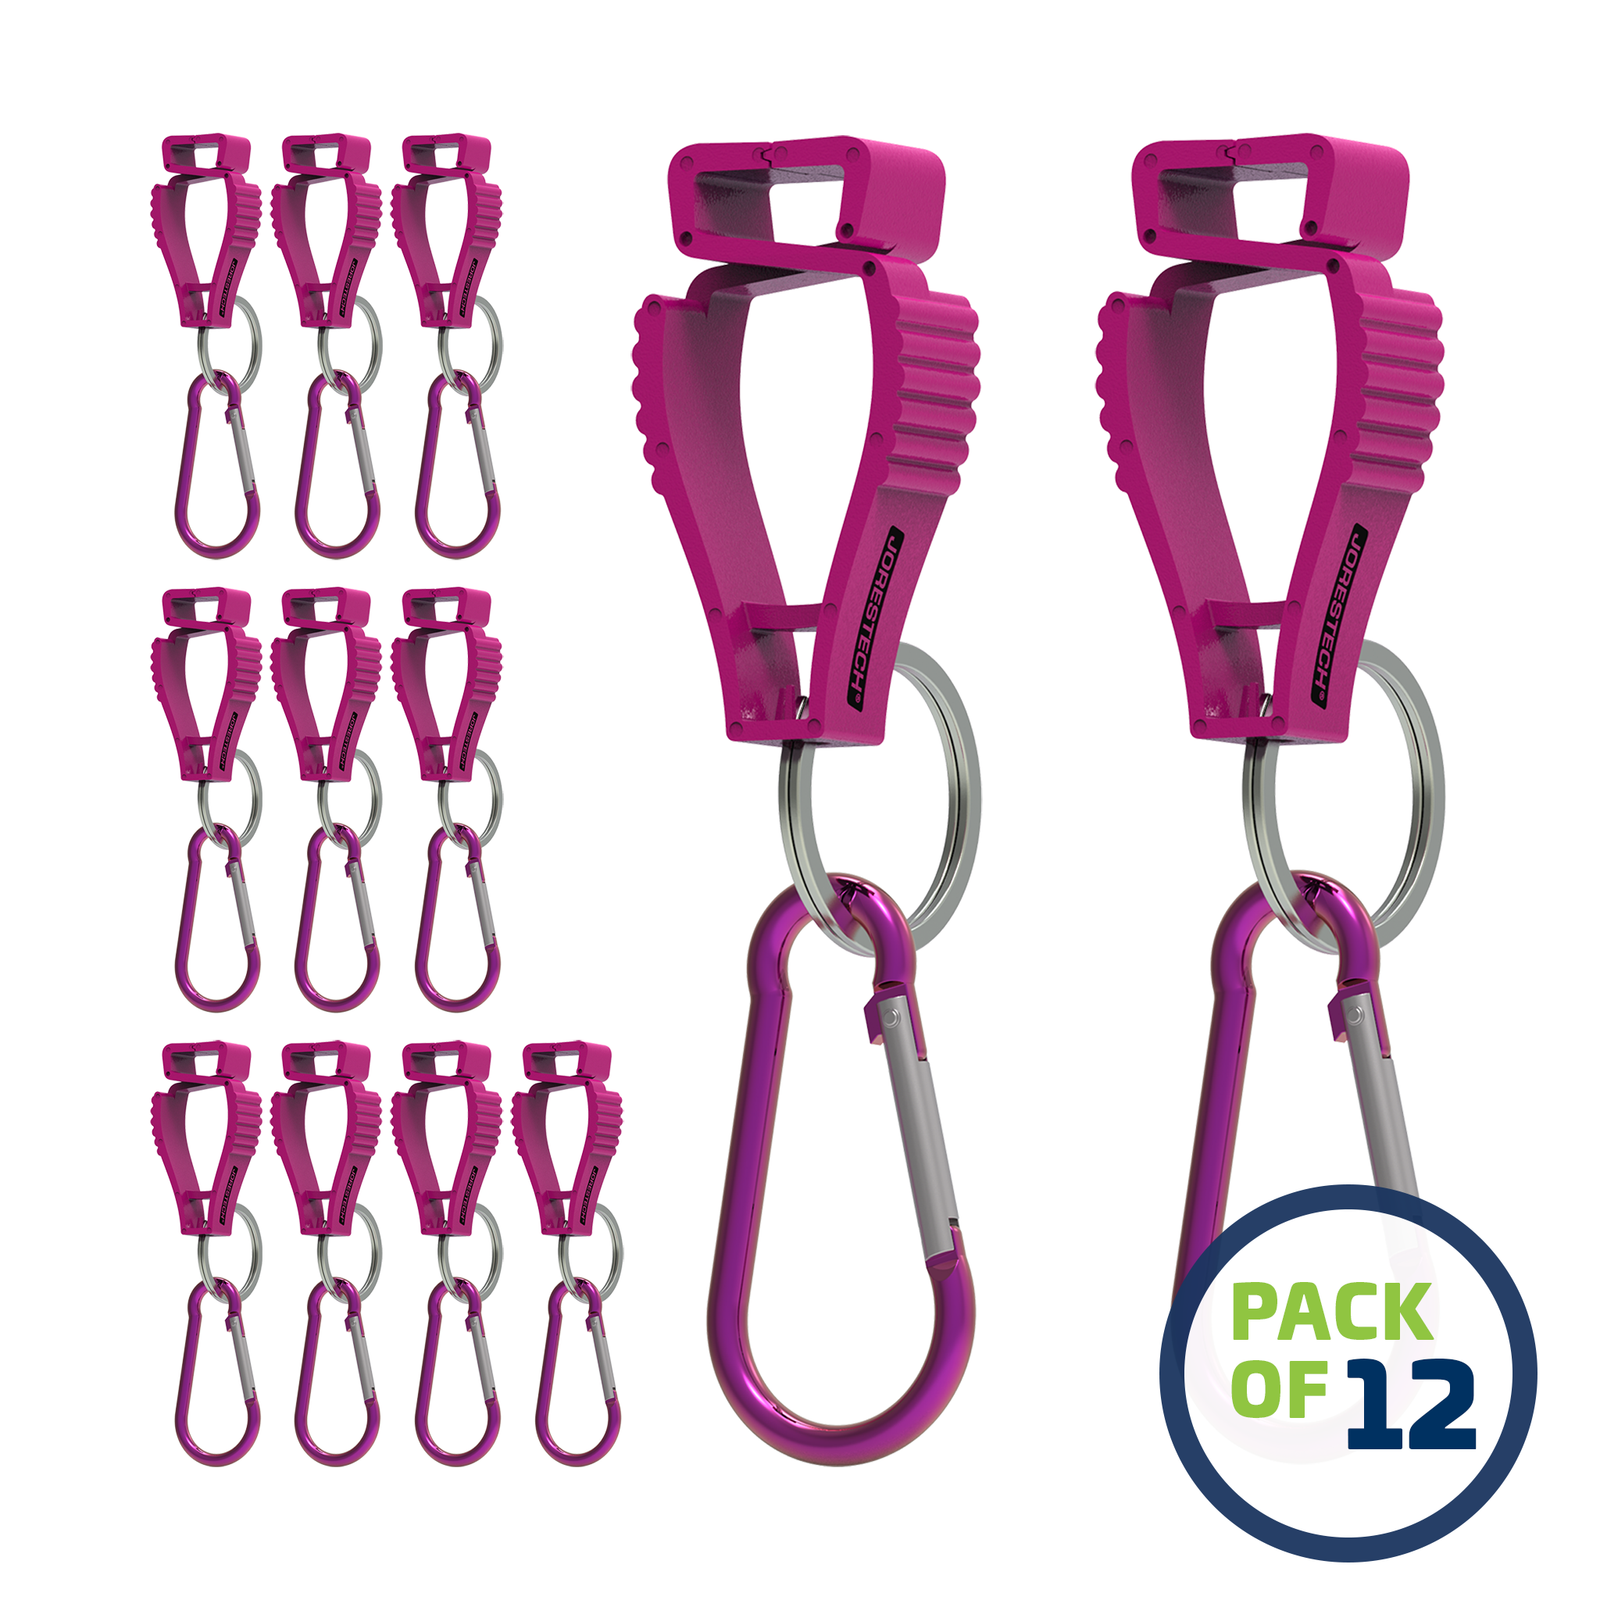 Pack of 12 Pink JORESTECH glove clip safety holders with carabiner 